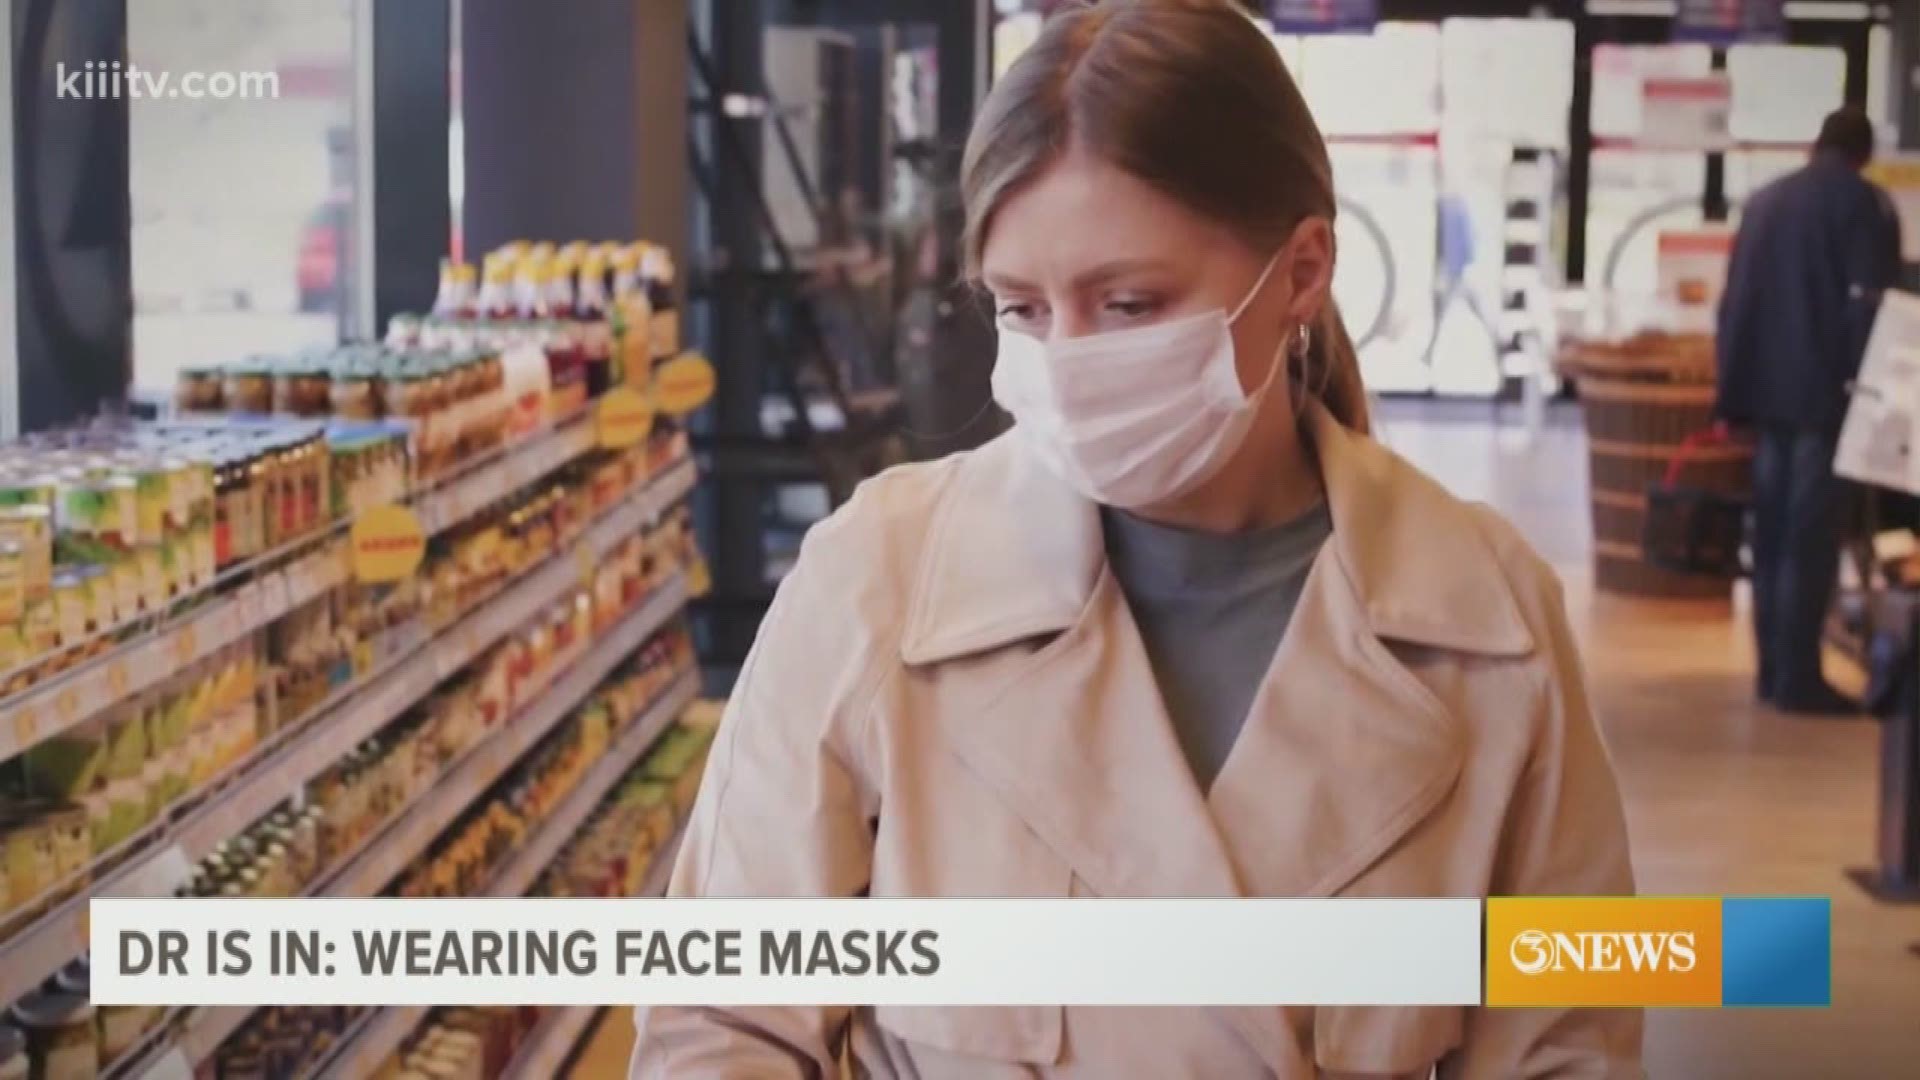 3News' Brian Burns spoke with Dr. Vijay about why people should be wearing during the pandemic.